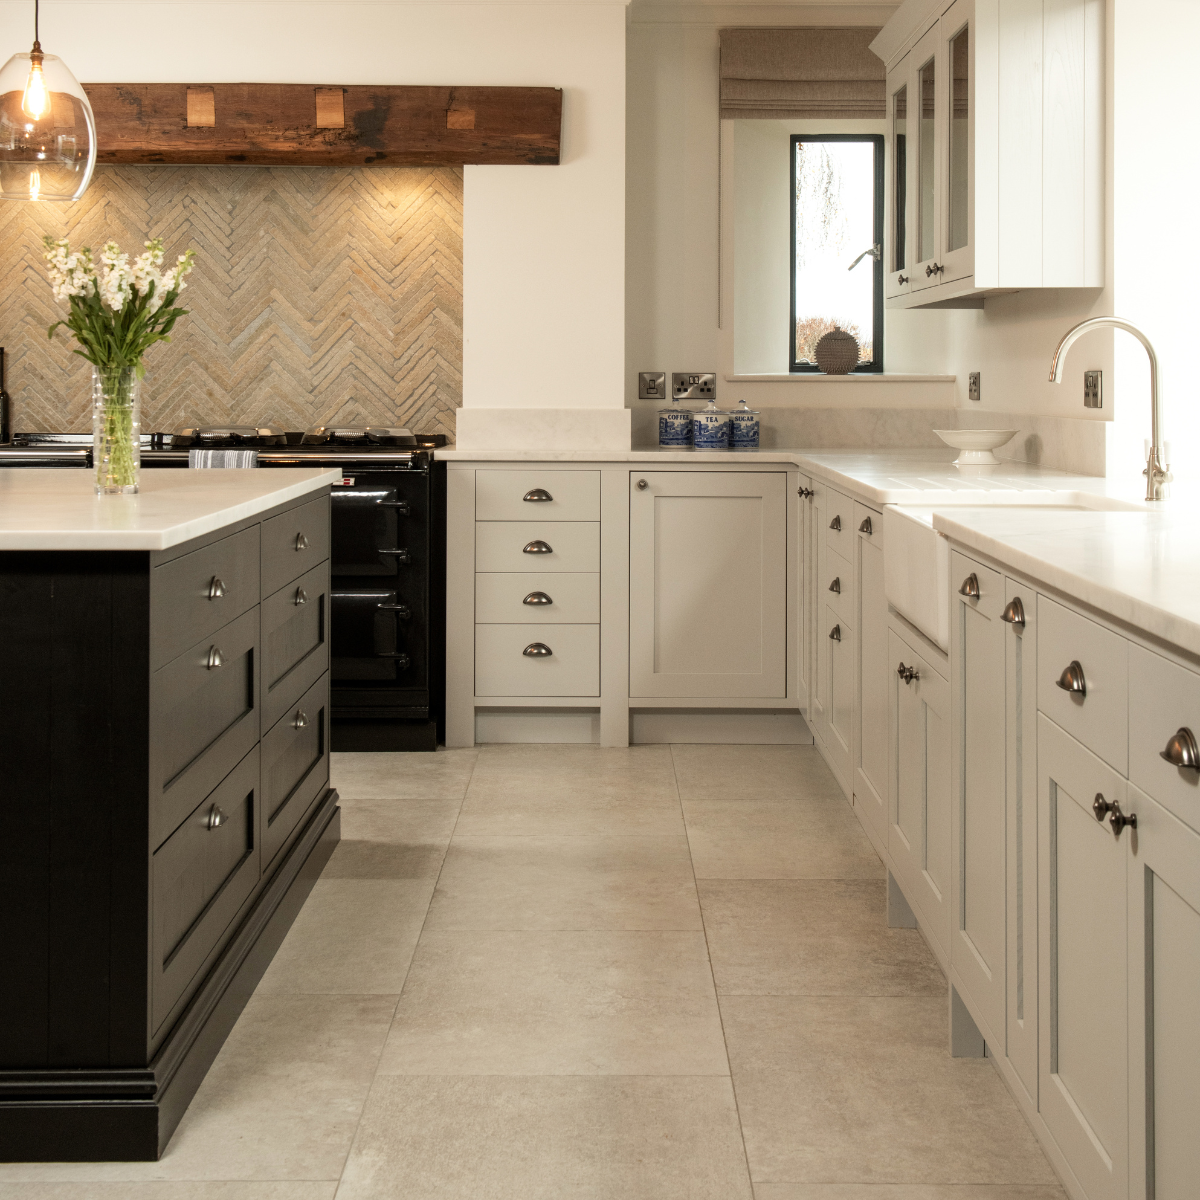 Lapicida at Danby Grange combines English Country home with French villa style with large format high-quality porcelain tiles in family kitchen